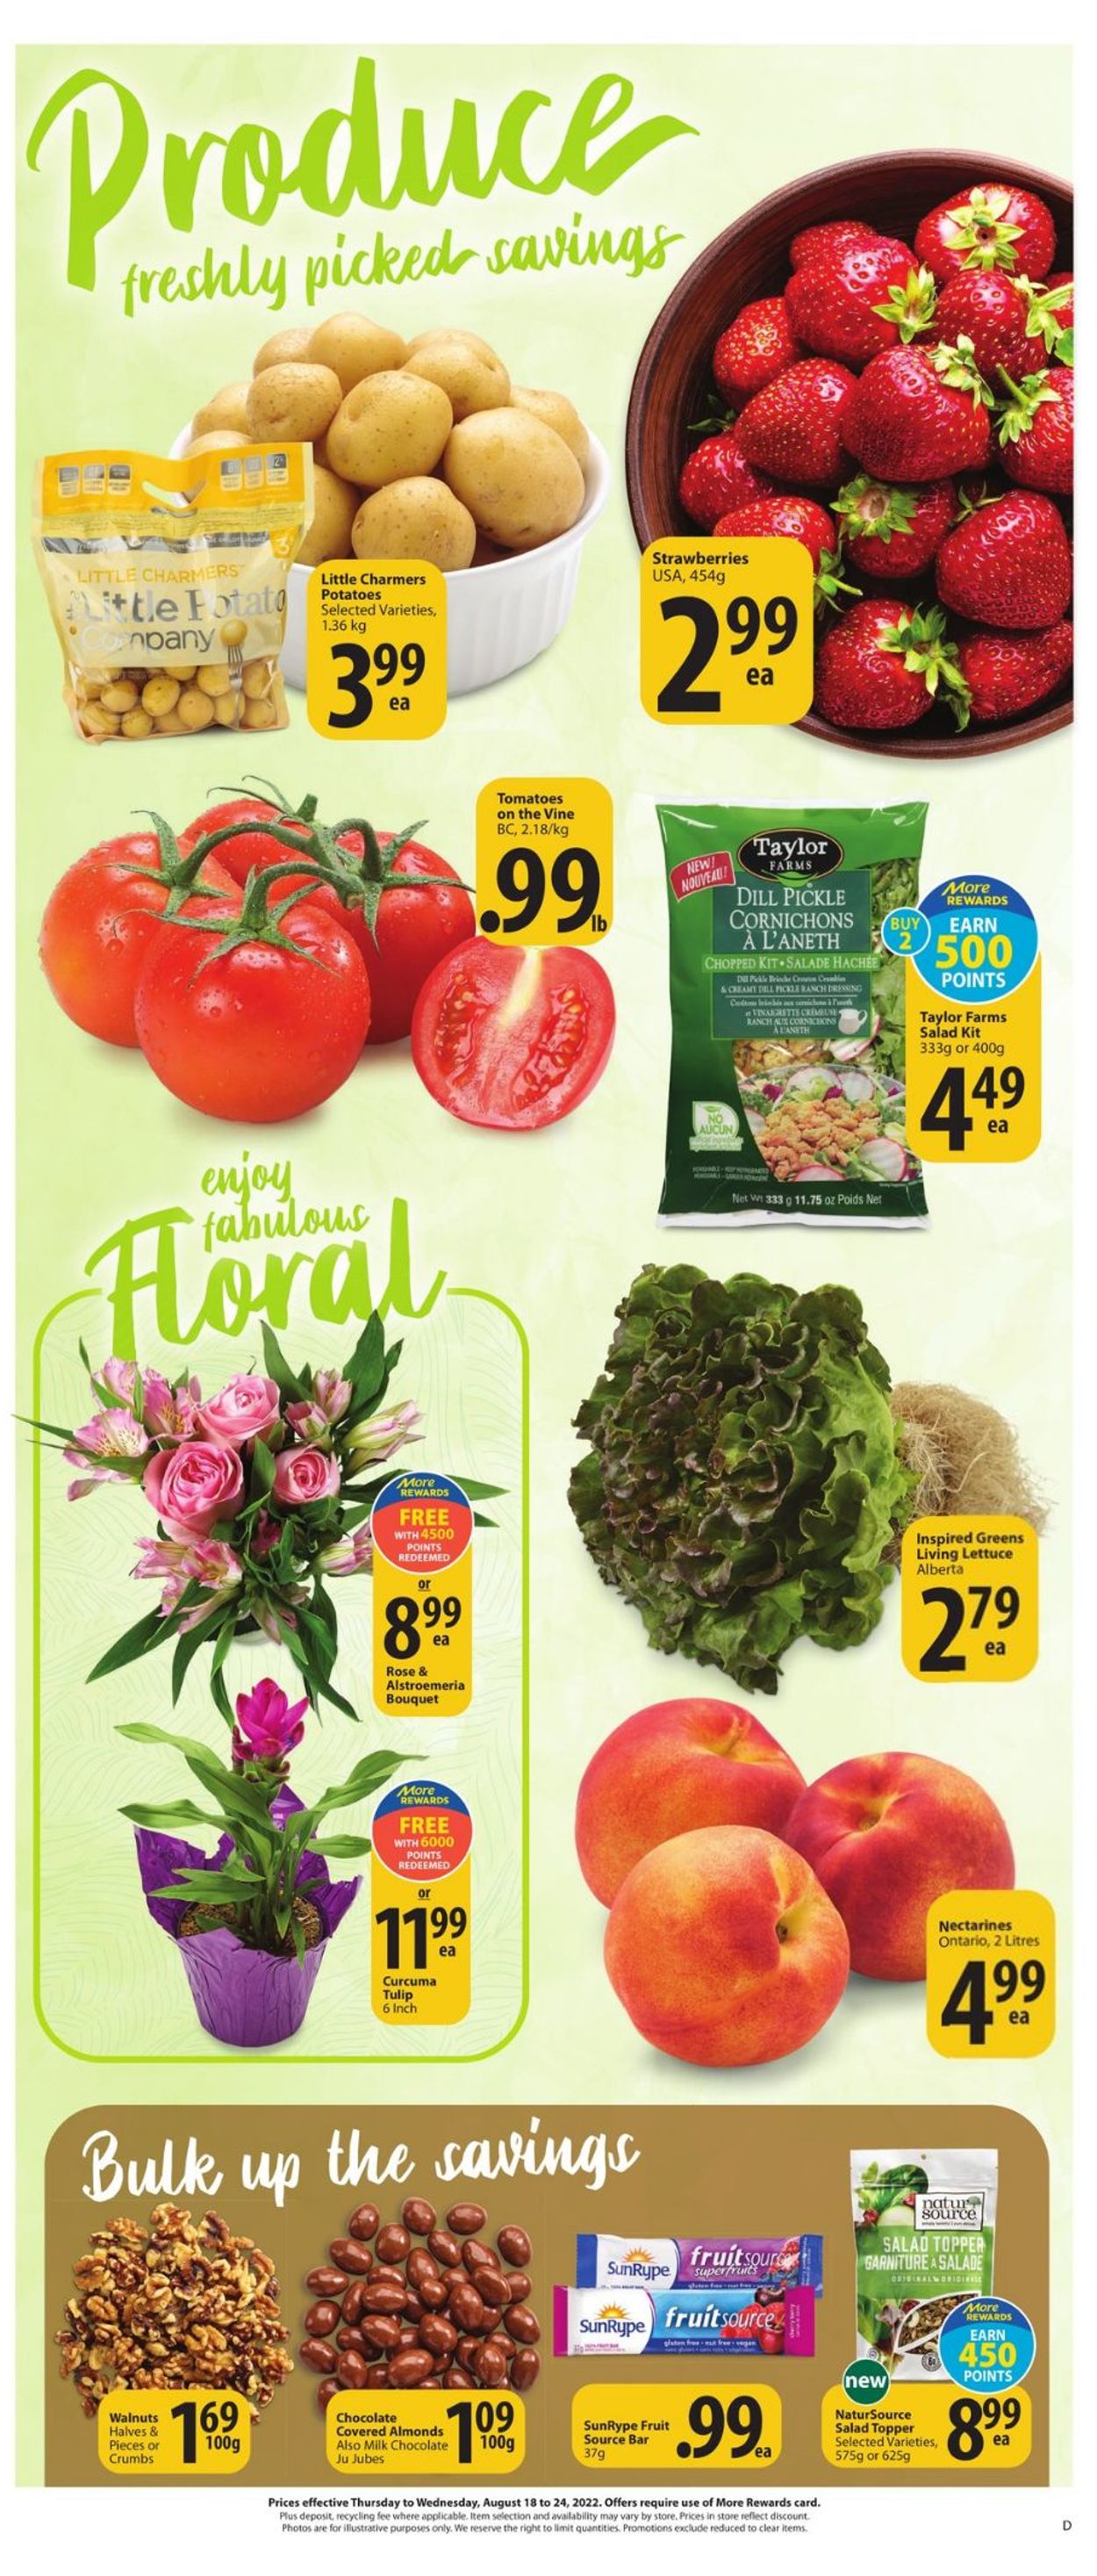 Save-On-Foods Flyer from 08/18/2022